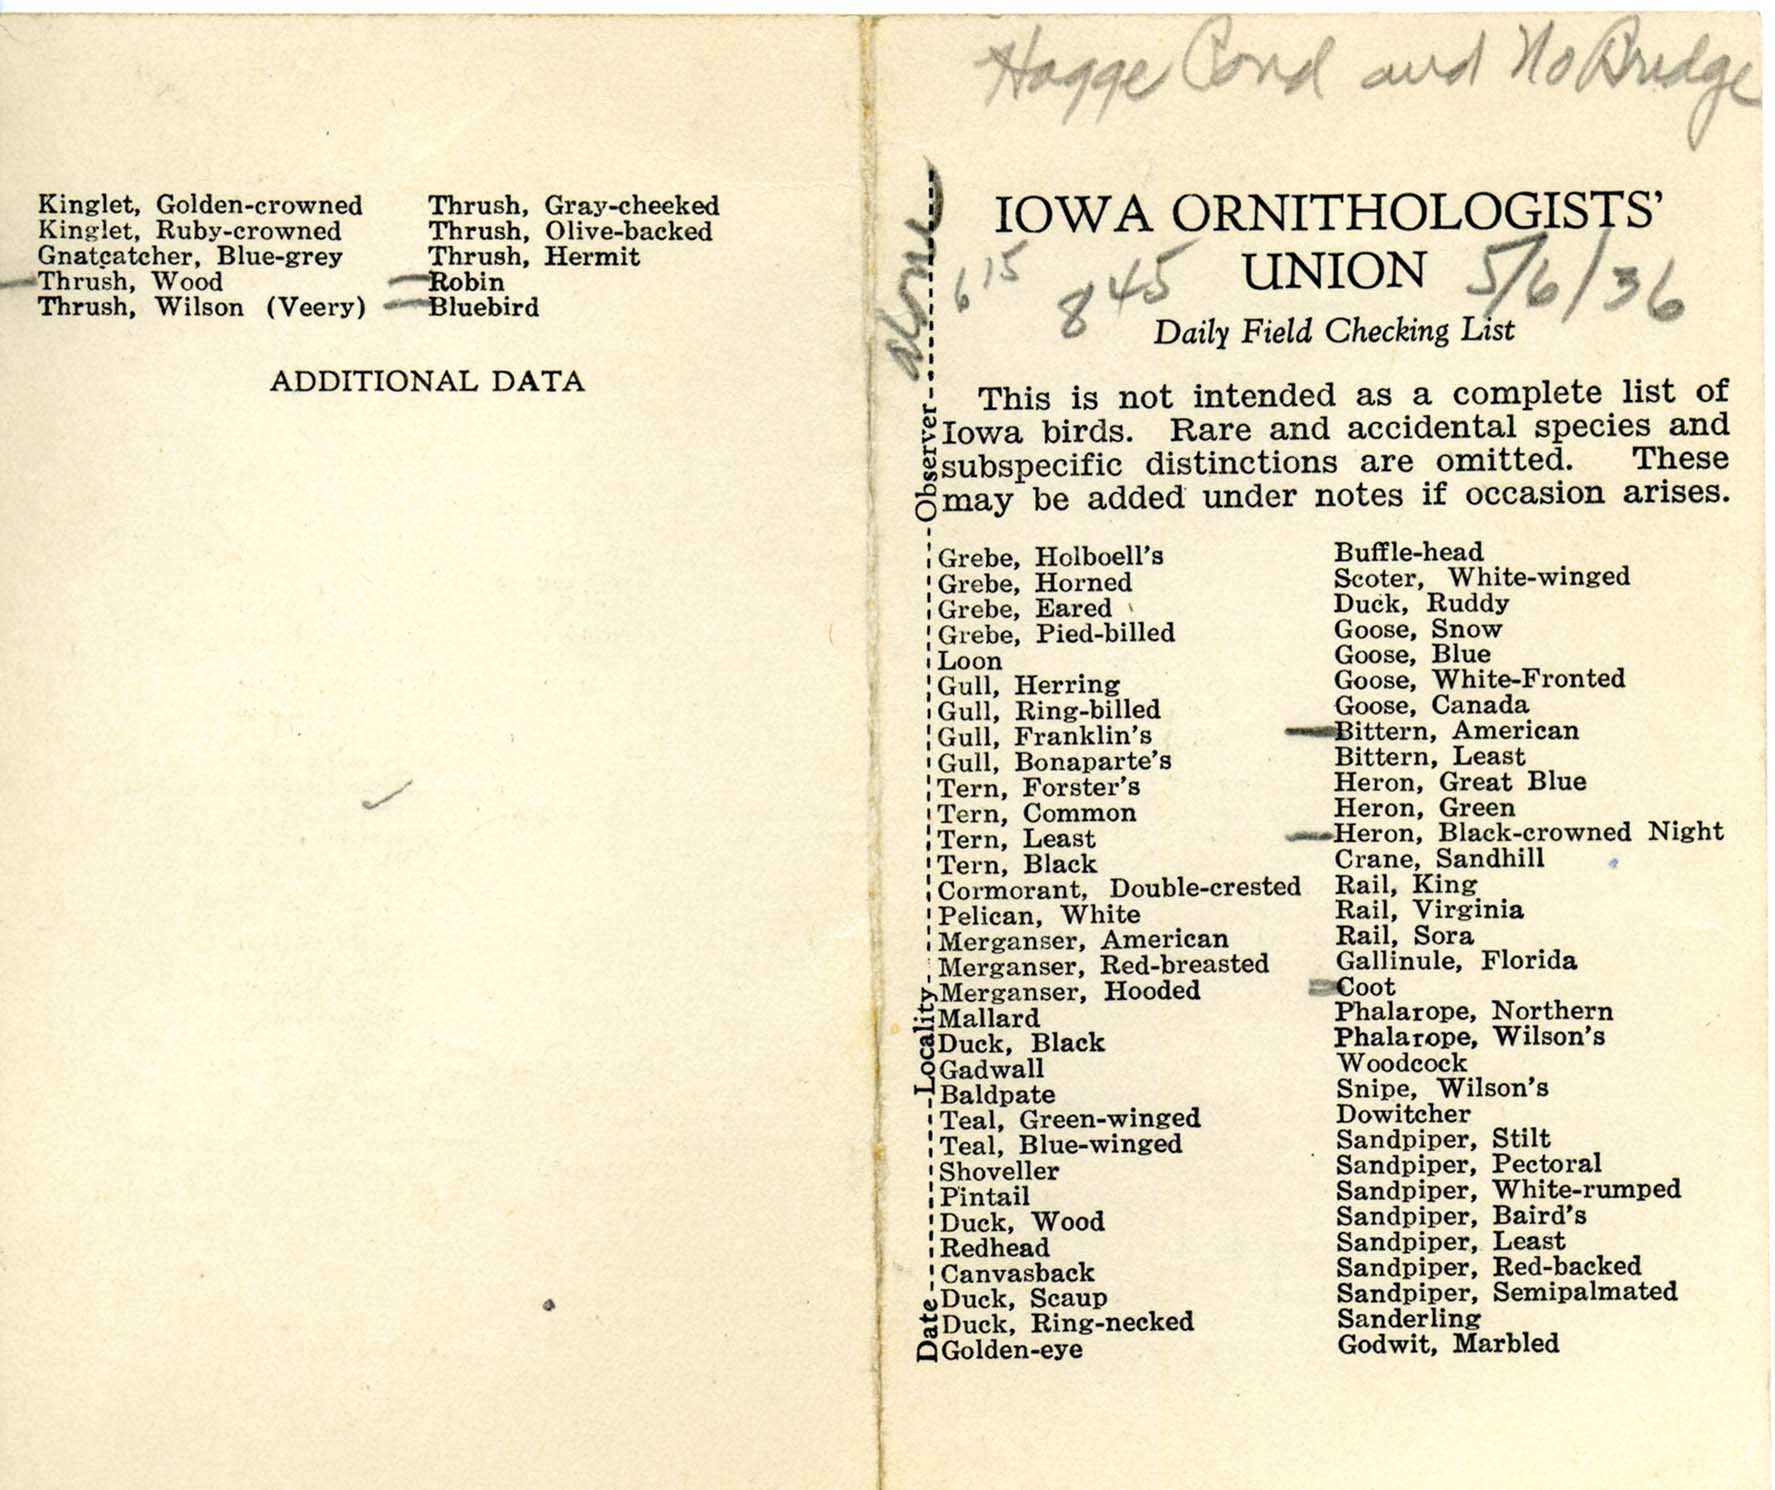 Daily field checking list by Walter Rosene, May 6, 1936